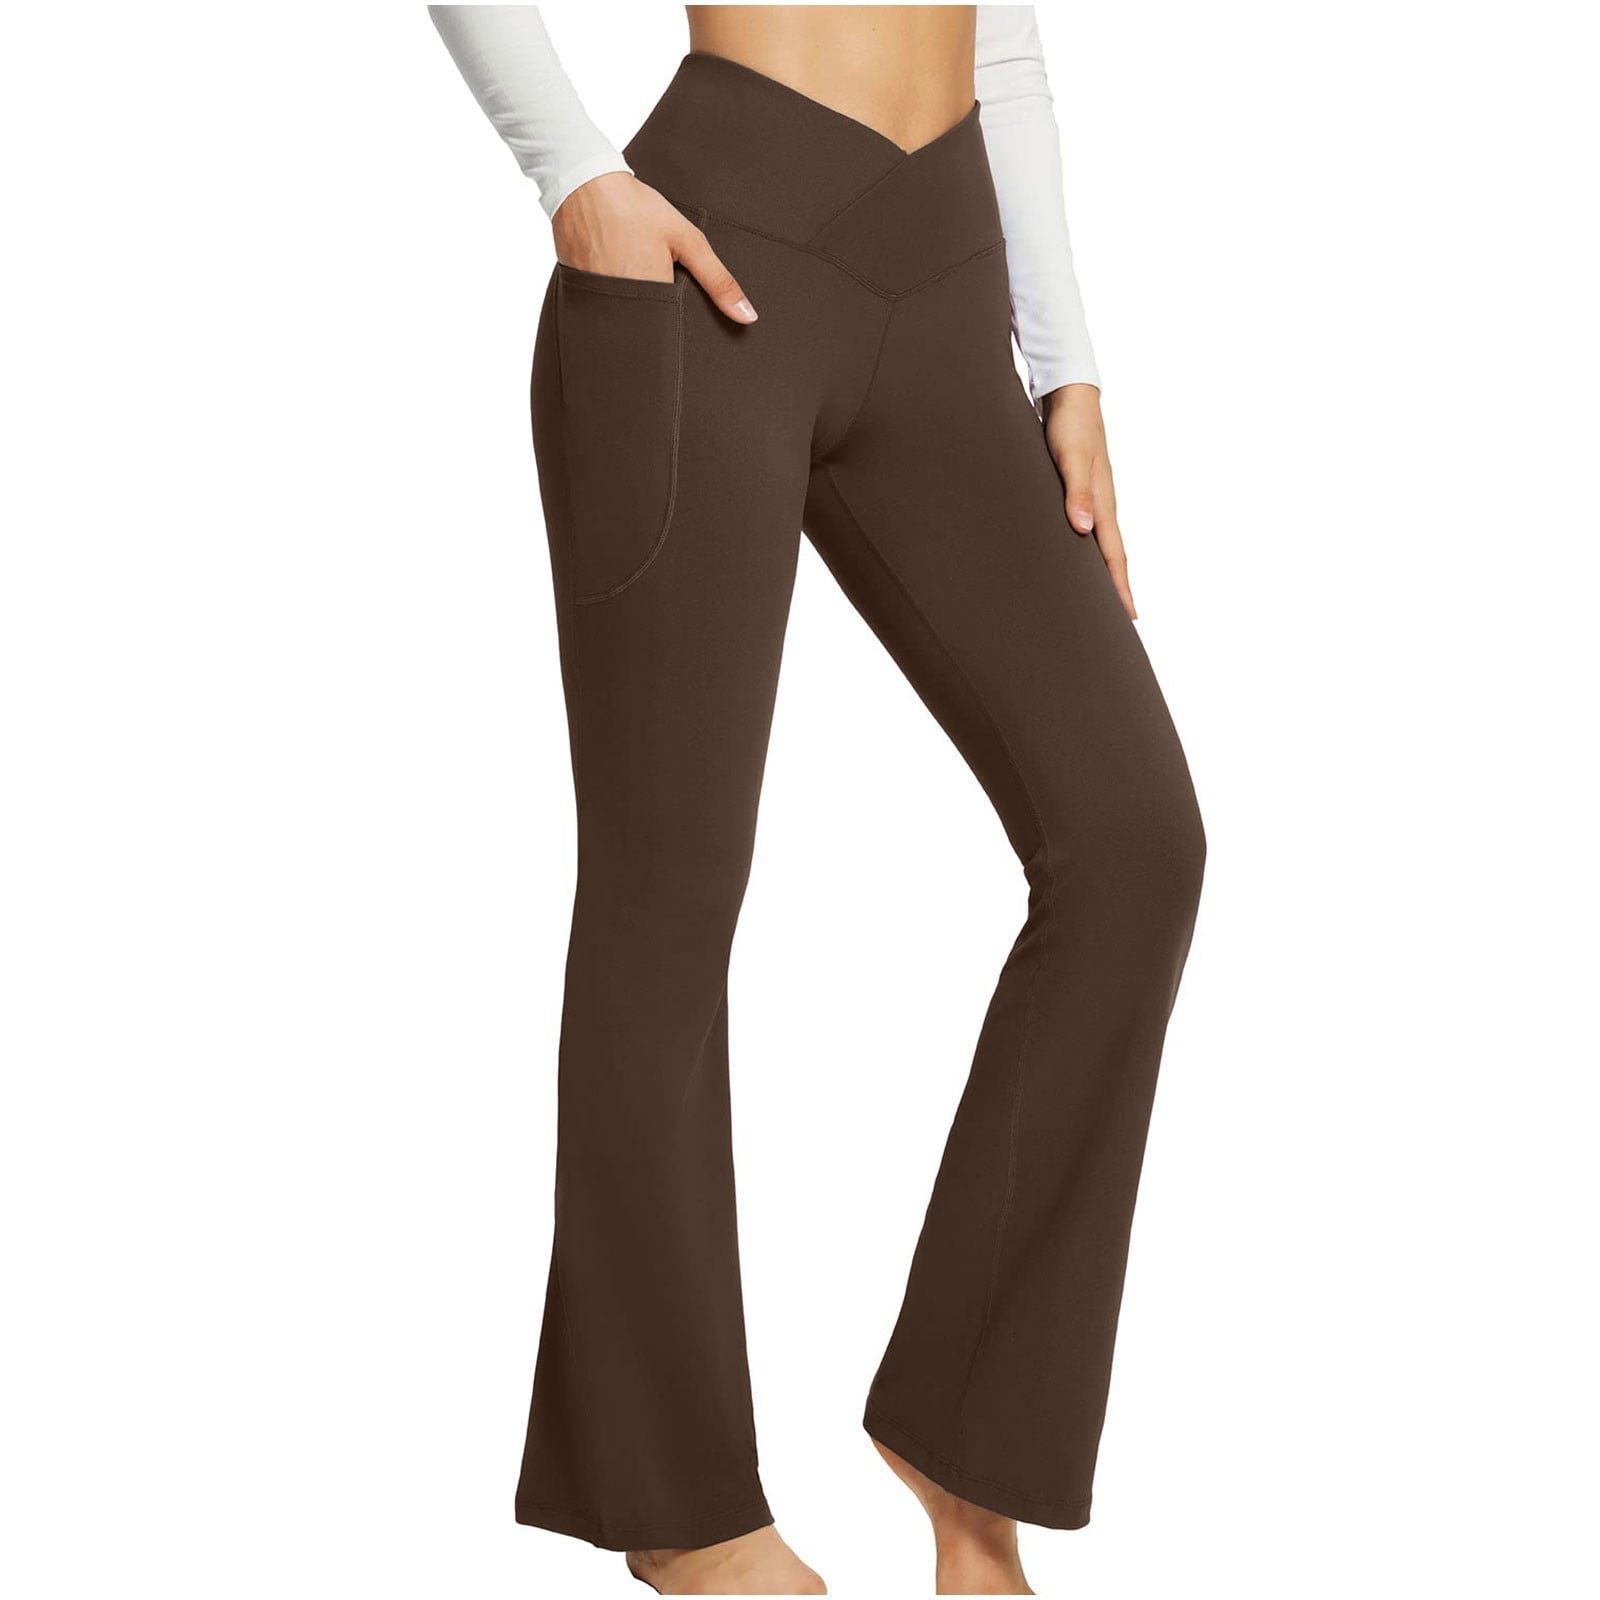 Don't Miss Out! Flare Leggings, Womens Pants, Womens Workout